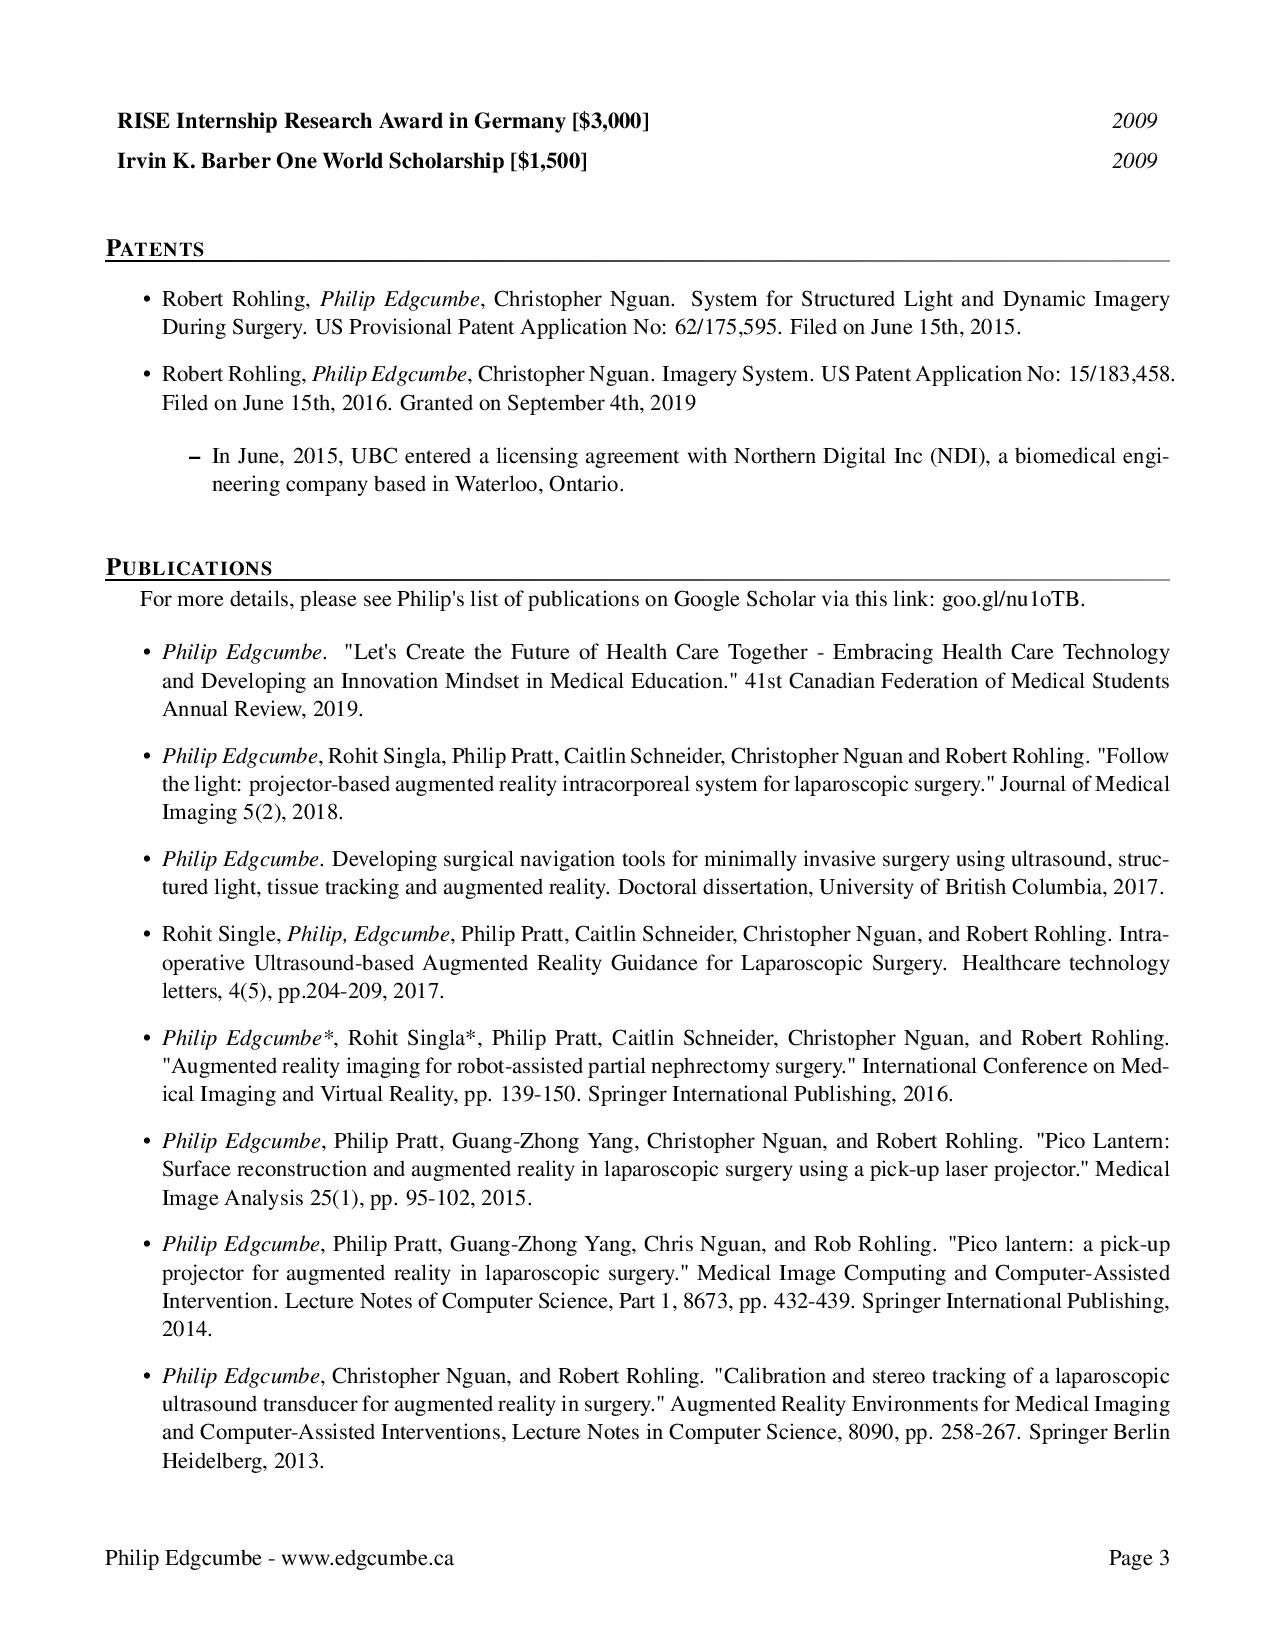 November-2020-Philip-Edgcumbe-Resume-8-pages-page-003